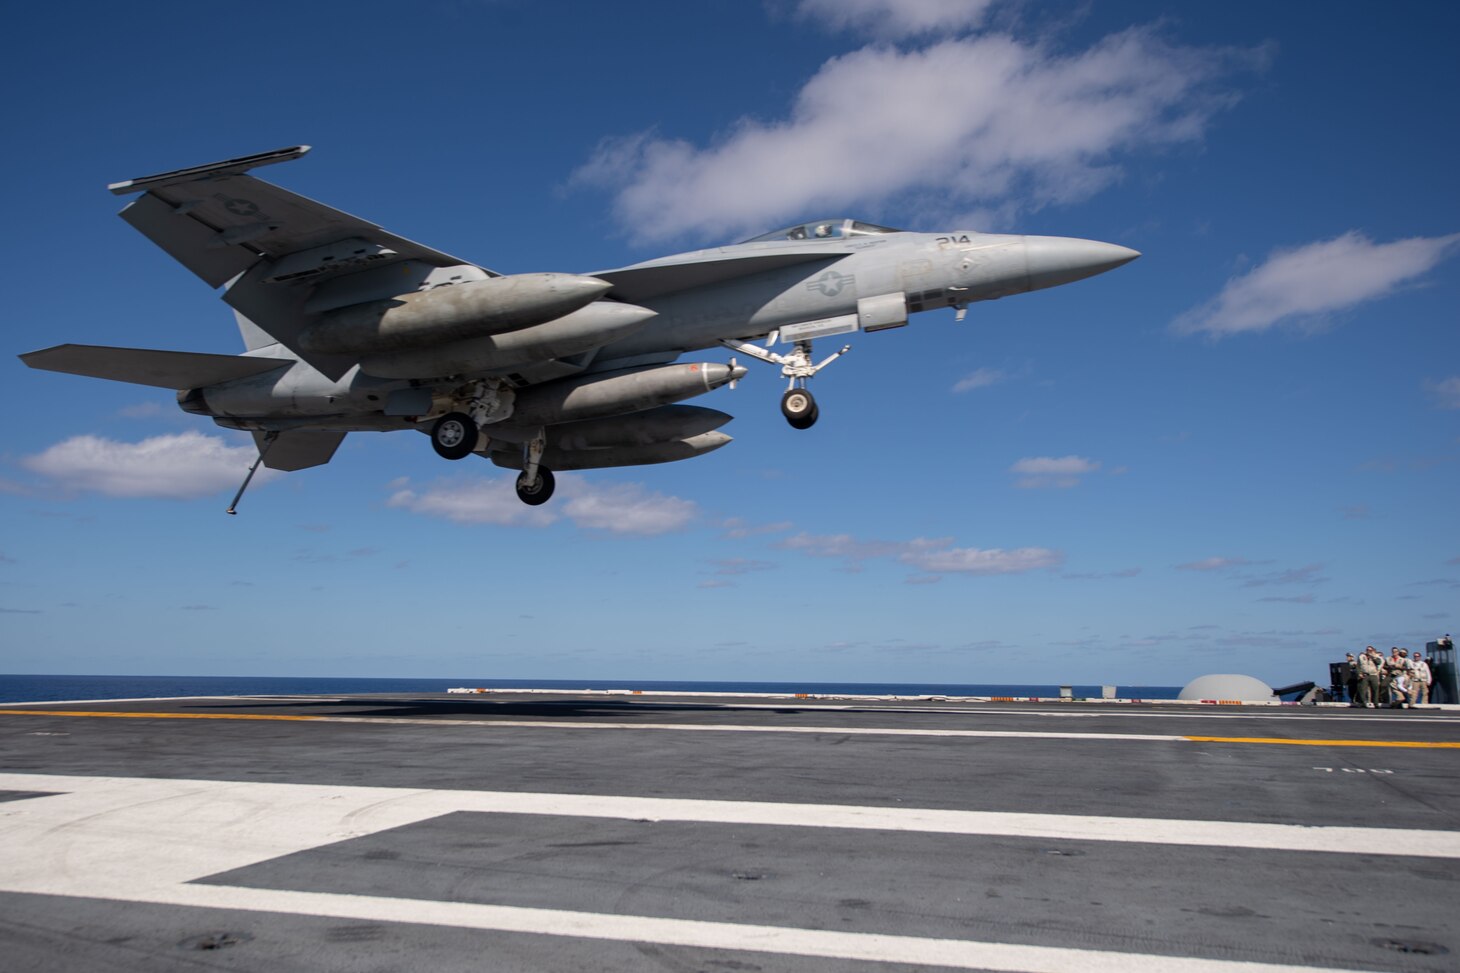 PHILIPPINE SEA (Nov. 16, 2018) An F/A-18E Super Hornet, with Strike Fighter Squadron (VFA) 14, prepares to land on the flight deck aboard the Nimitz-class aircraft carrier USS John C. Stennis (CVN 74). John C. Stennis is underway and conducting operations in international waters as part of a dual carrier strike force exercise. The U.S. Navy has patrolled the Indo-Pacific region routinely for more than 70 years promoting regional security, stability and prosperity.